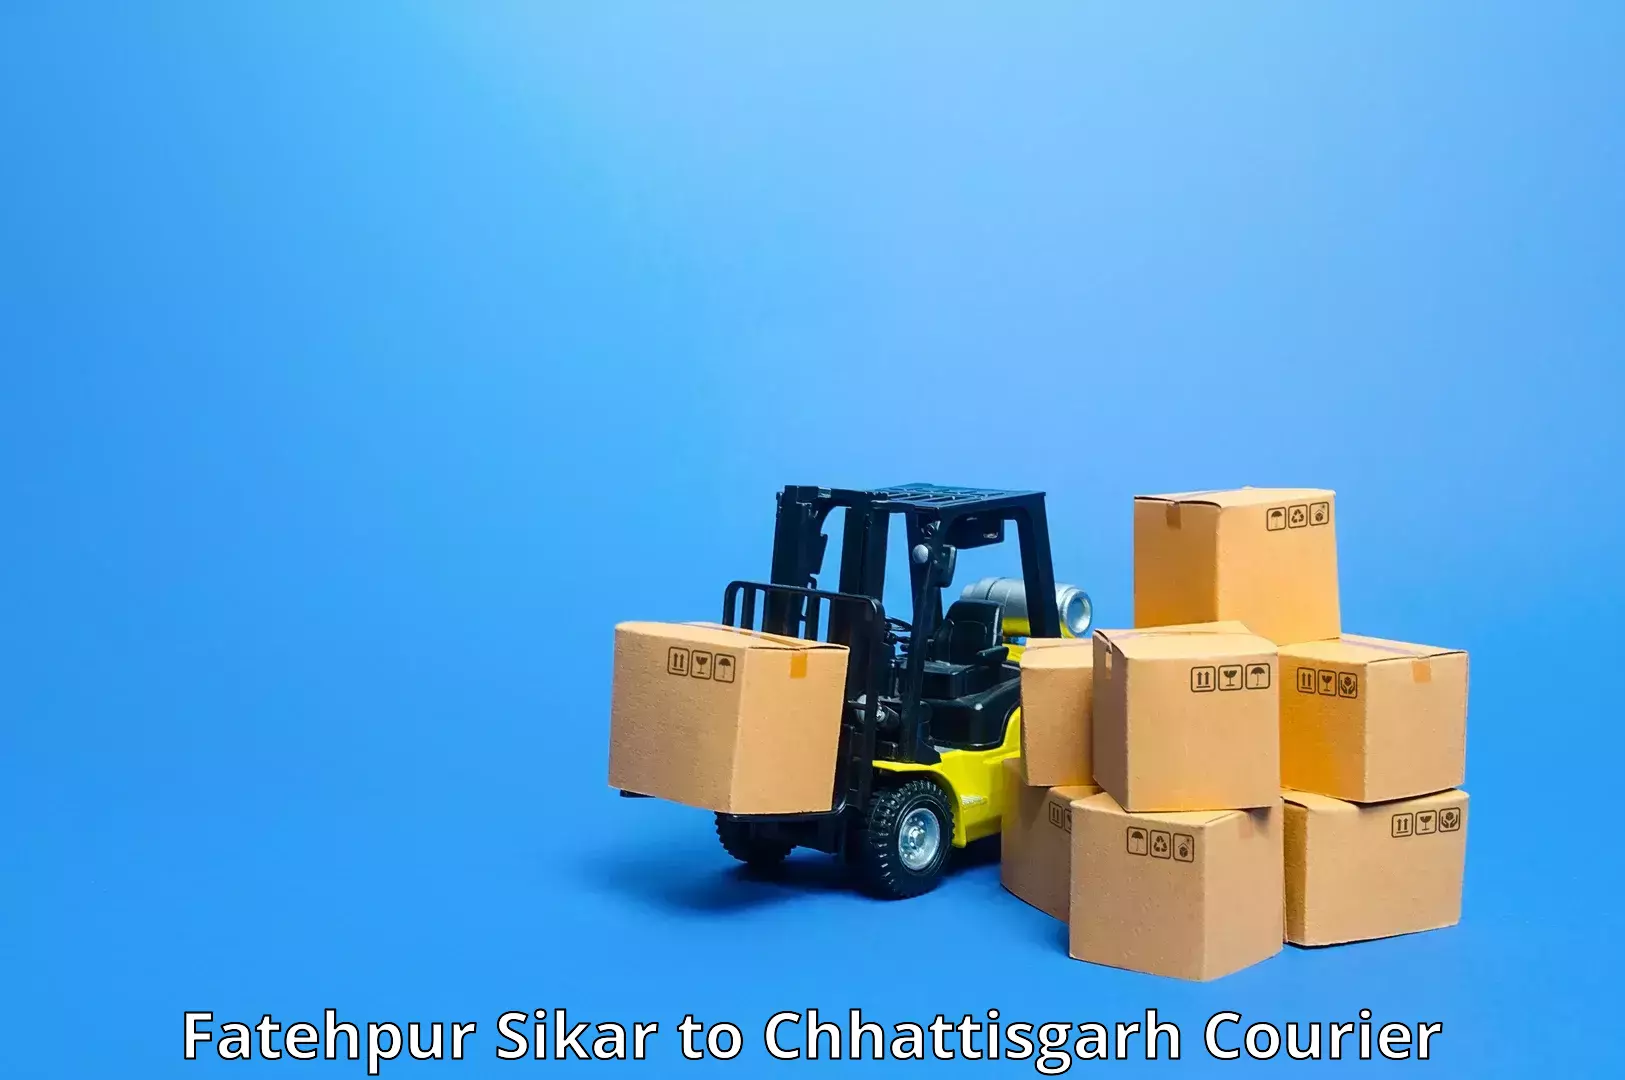 State-of-the-art courier technology Fatehpur Sikar to Baloda Bazar